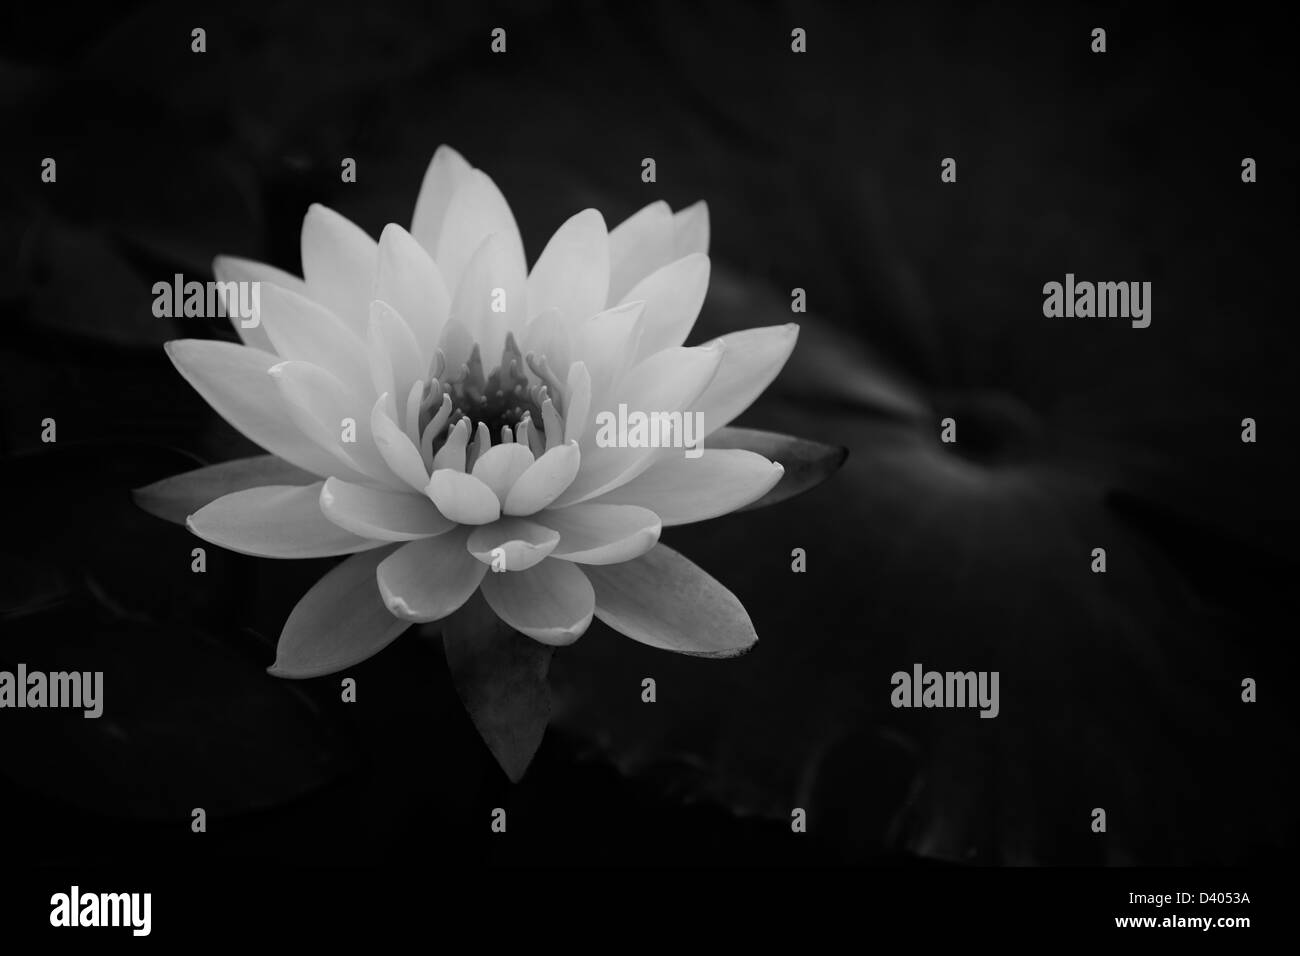 Beautiful floral Black and white photograph of a glowing water lily ethereal black background shallow depth of field, light reflections Stock Photo